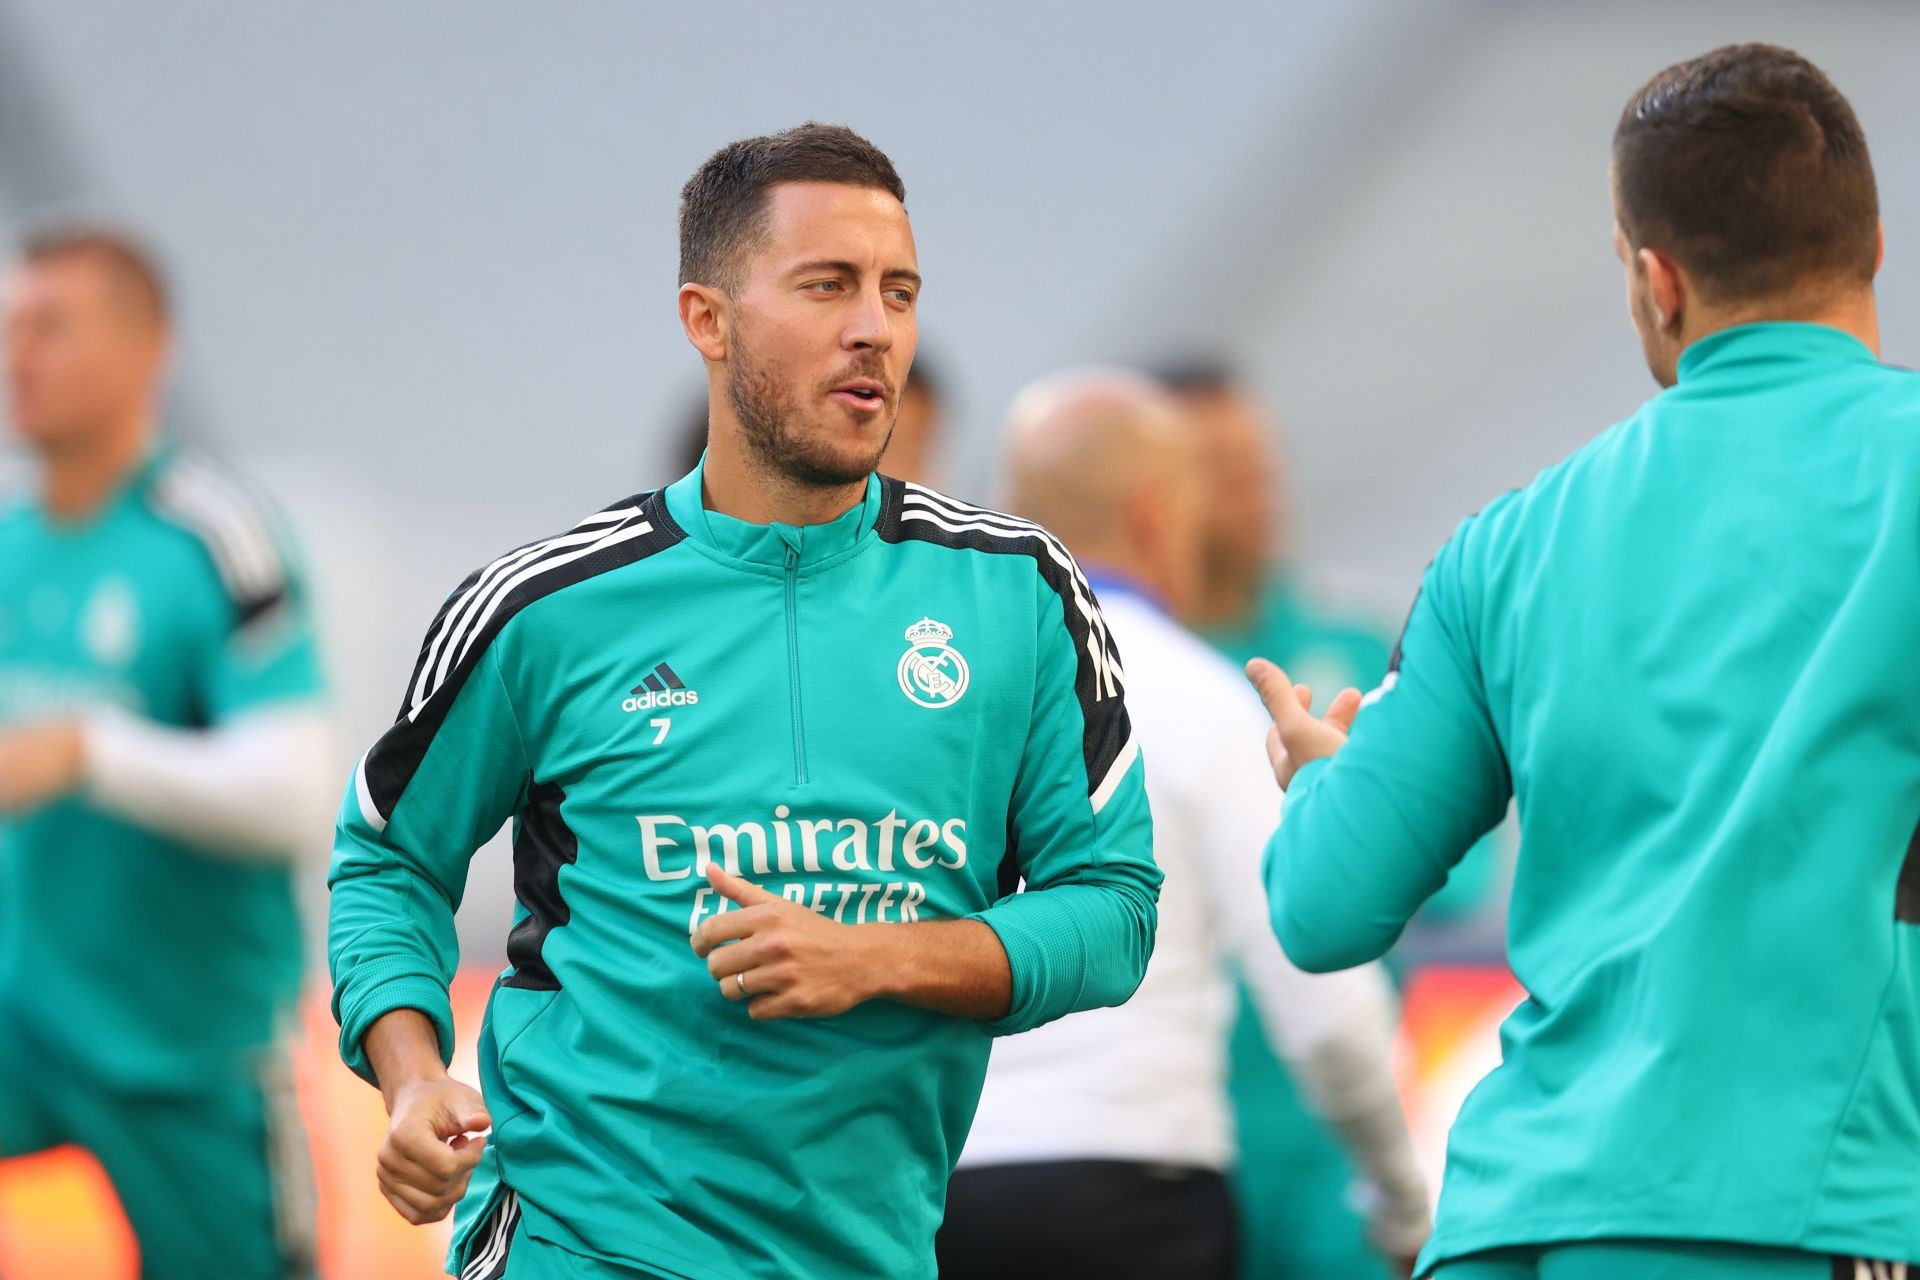 Eden Hazard is hoping to finally live up to expectations at Real Madrid next season.